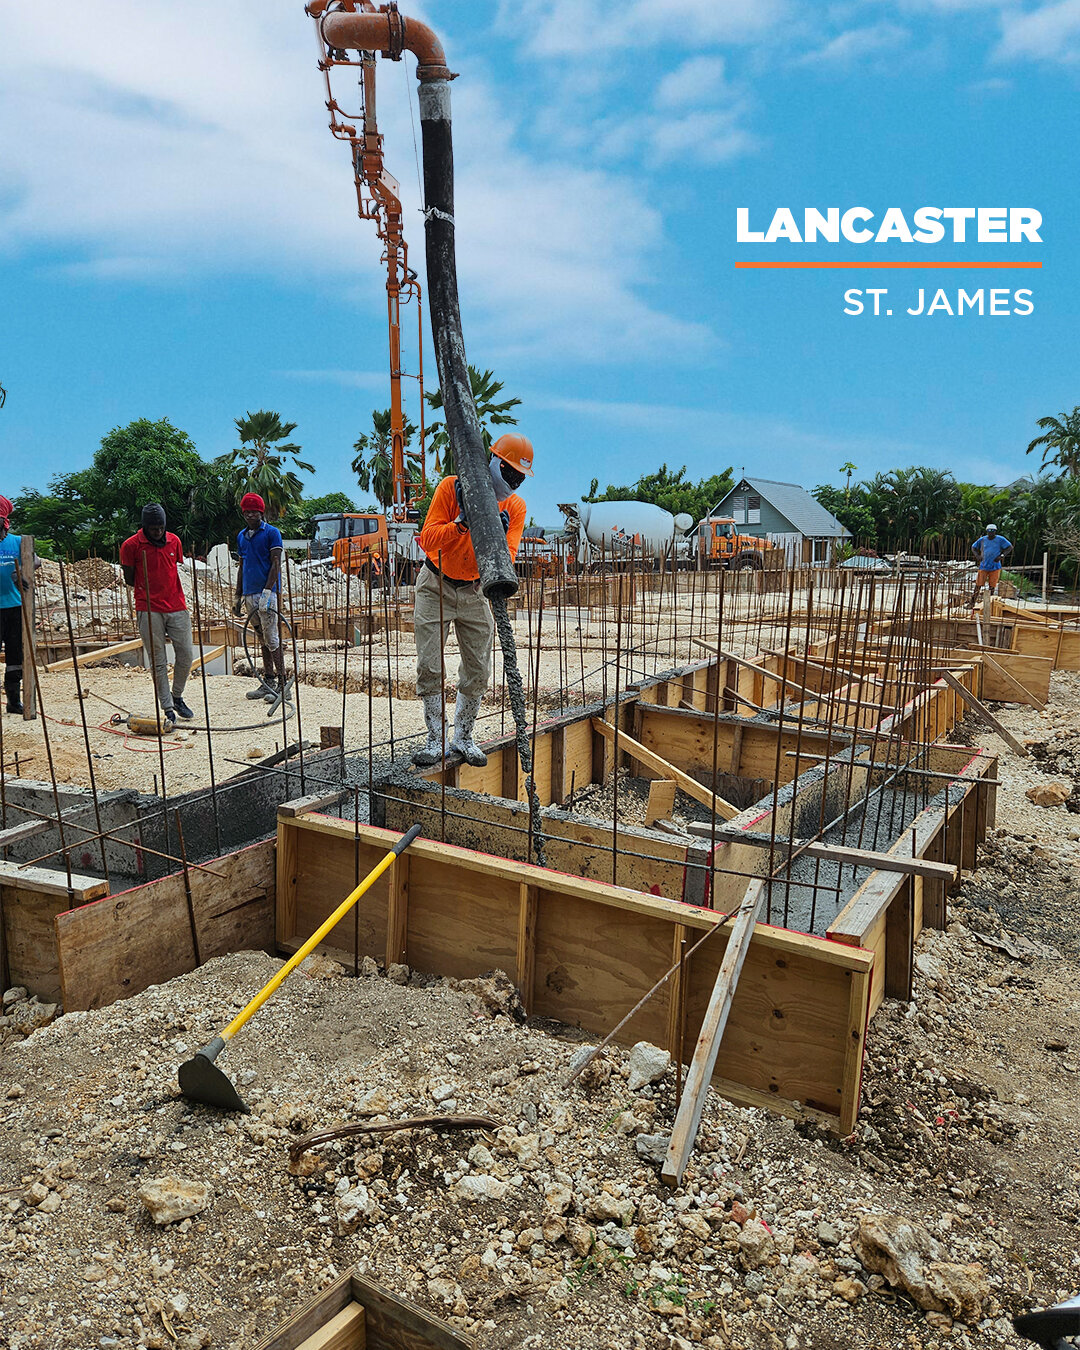 Concrete pumping in full swing on-site at Lancaster. Great for reaching those hard to reach spots! 👷🧱

Interested in learning more about our services?
☎️: +1-246-436-3952
💻: www.readymixbarbados.com

#ReadyMixBarbados #BuildWithReadyMix #Concrete 